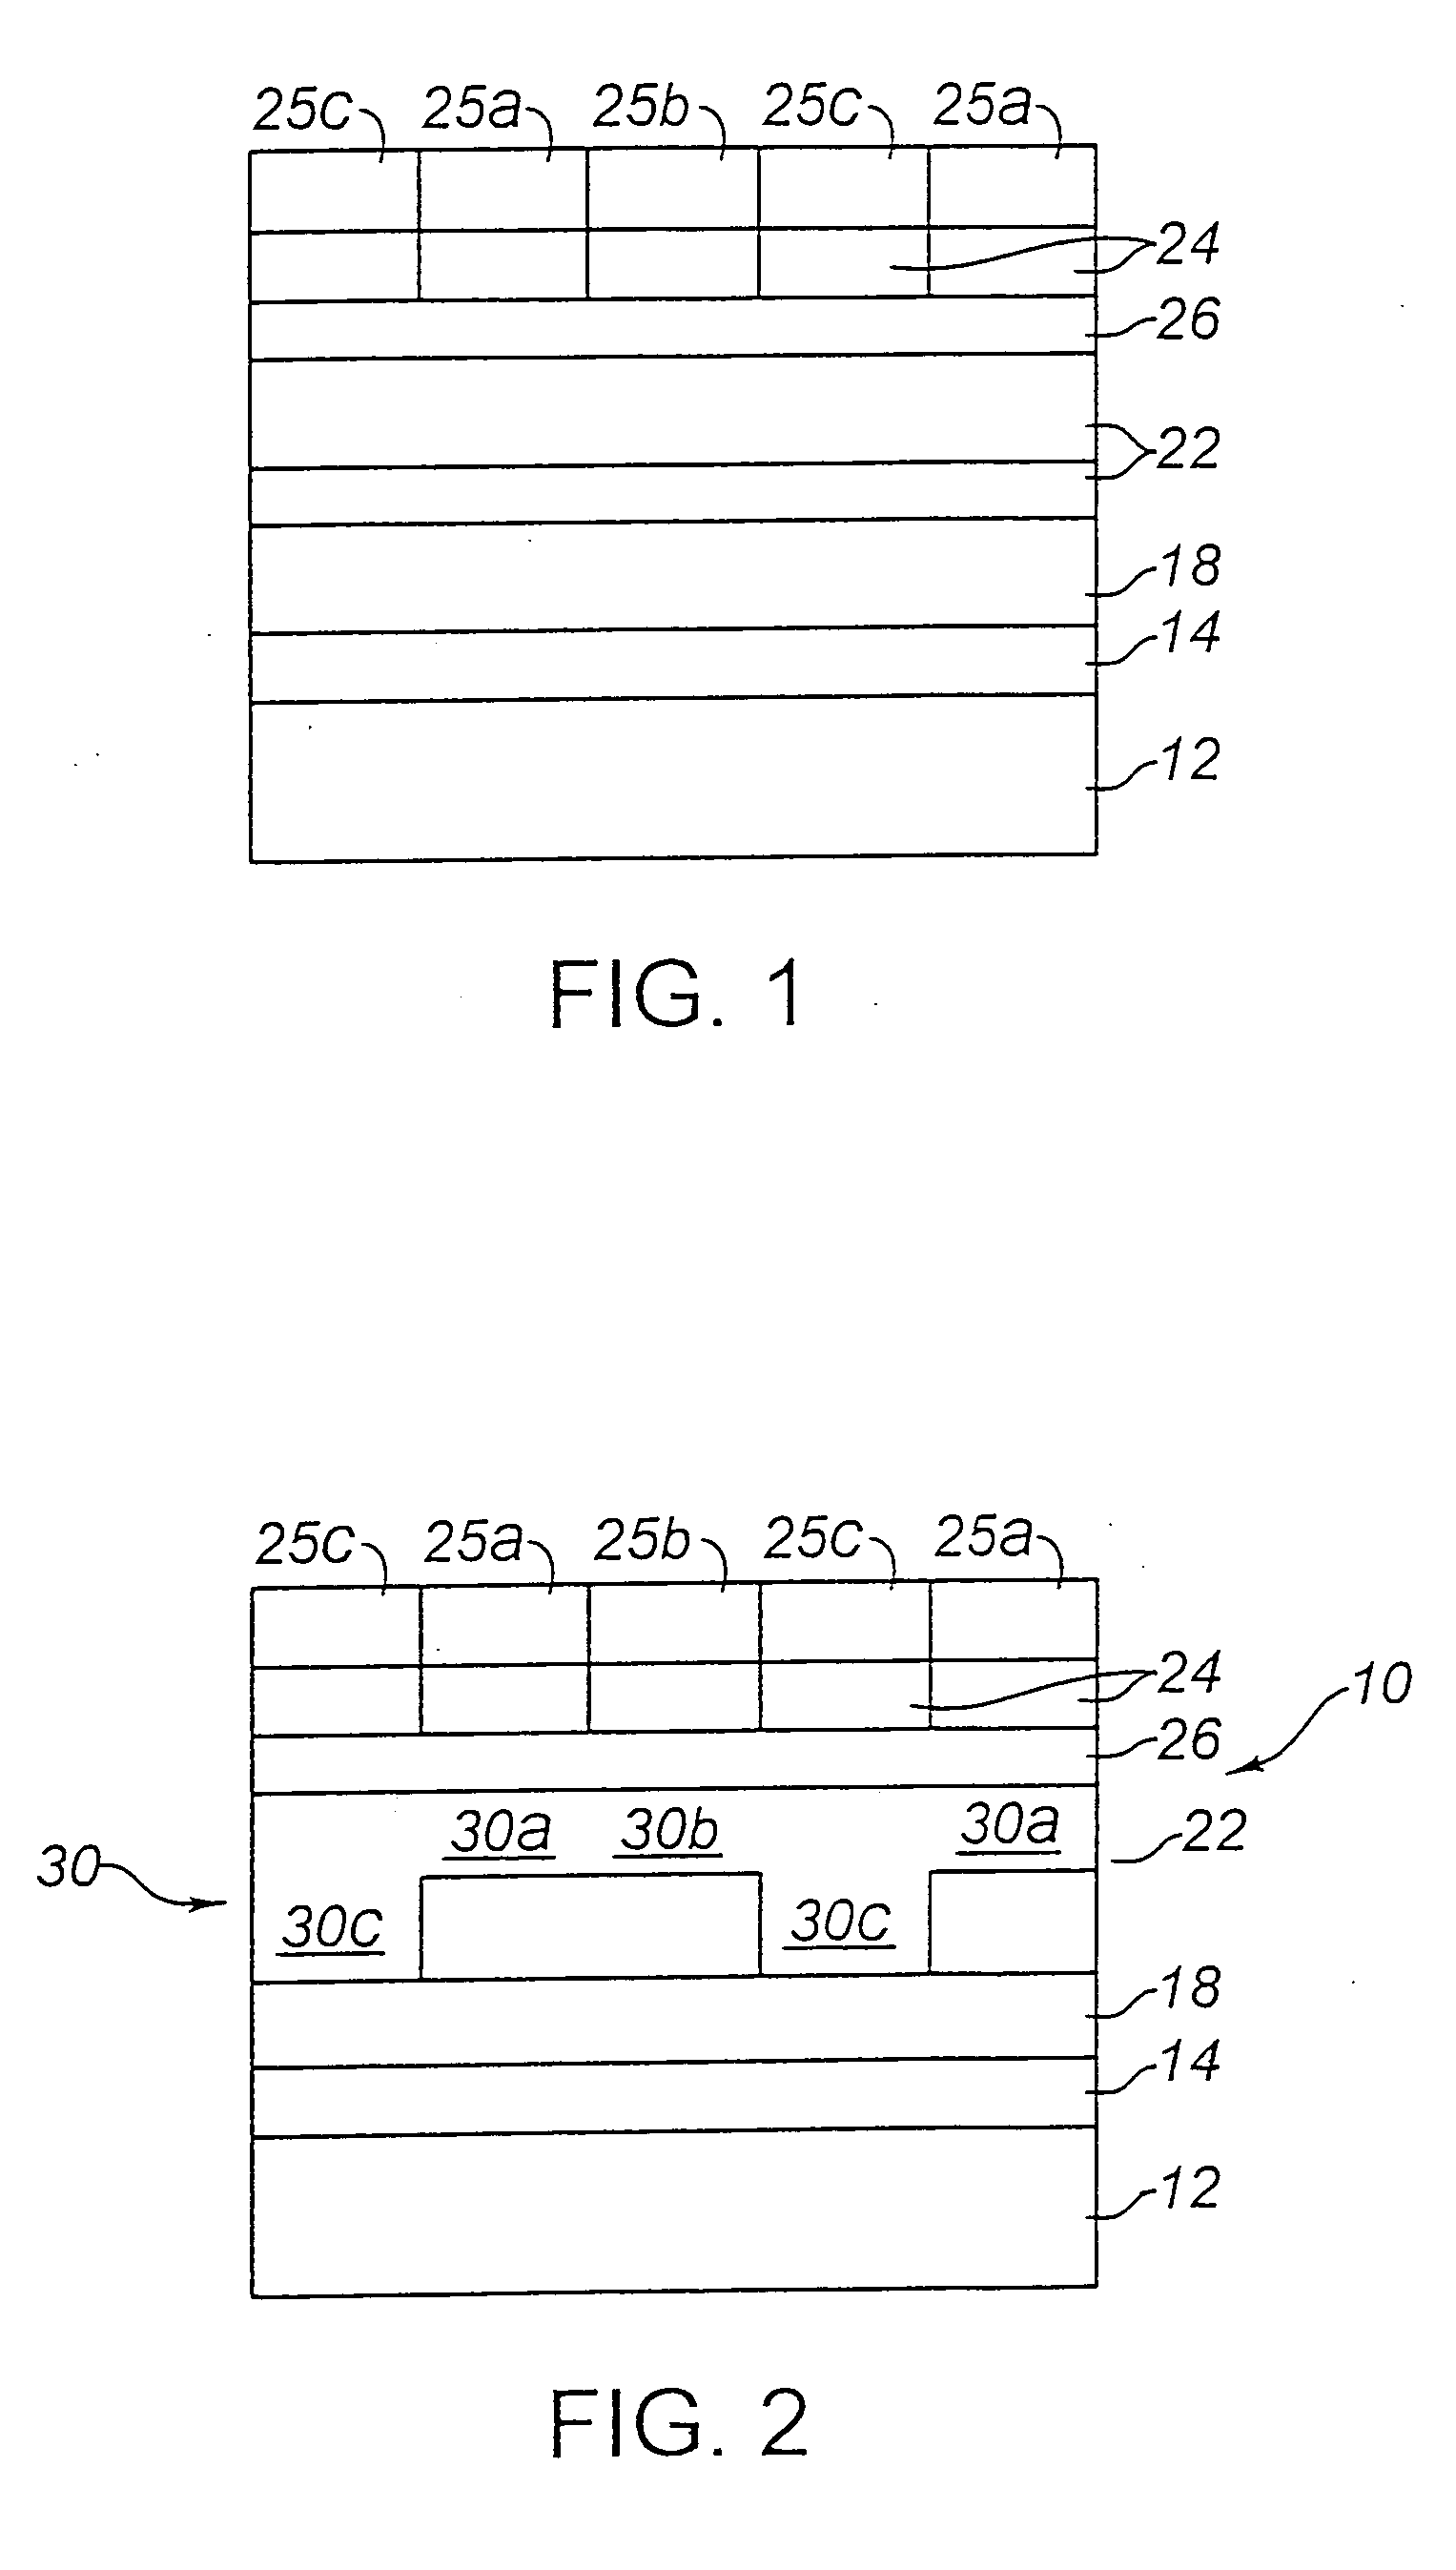 Method of forming a thick film dielectric layer in an electroluminescent laminate